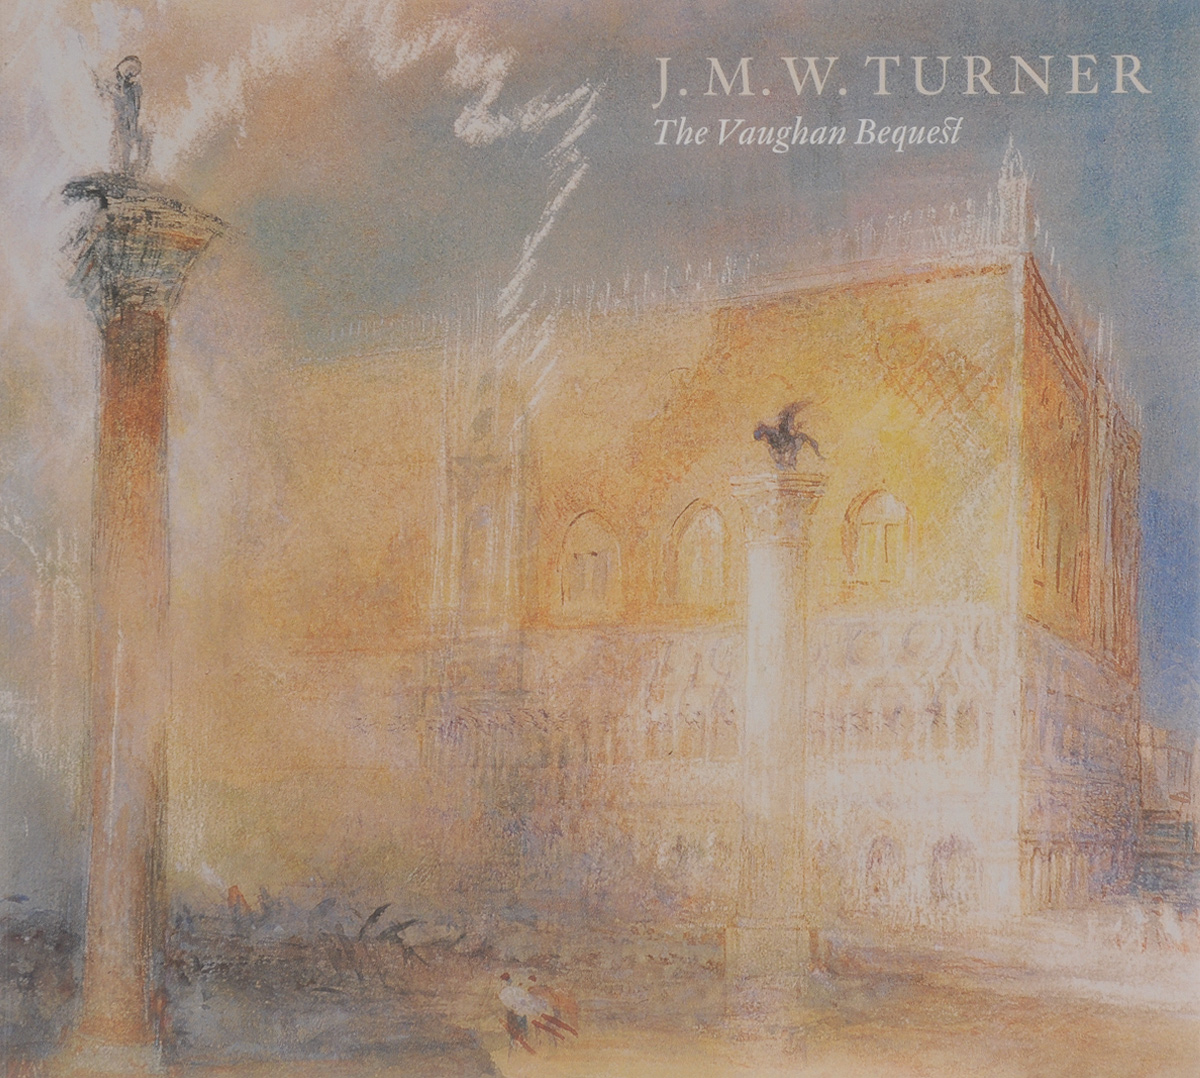 J. M. W. Turner: The Vaughan Bequest